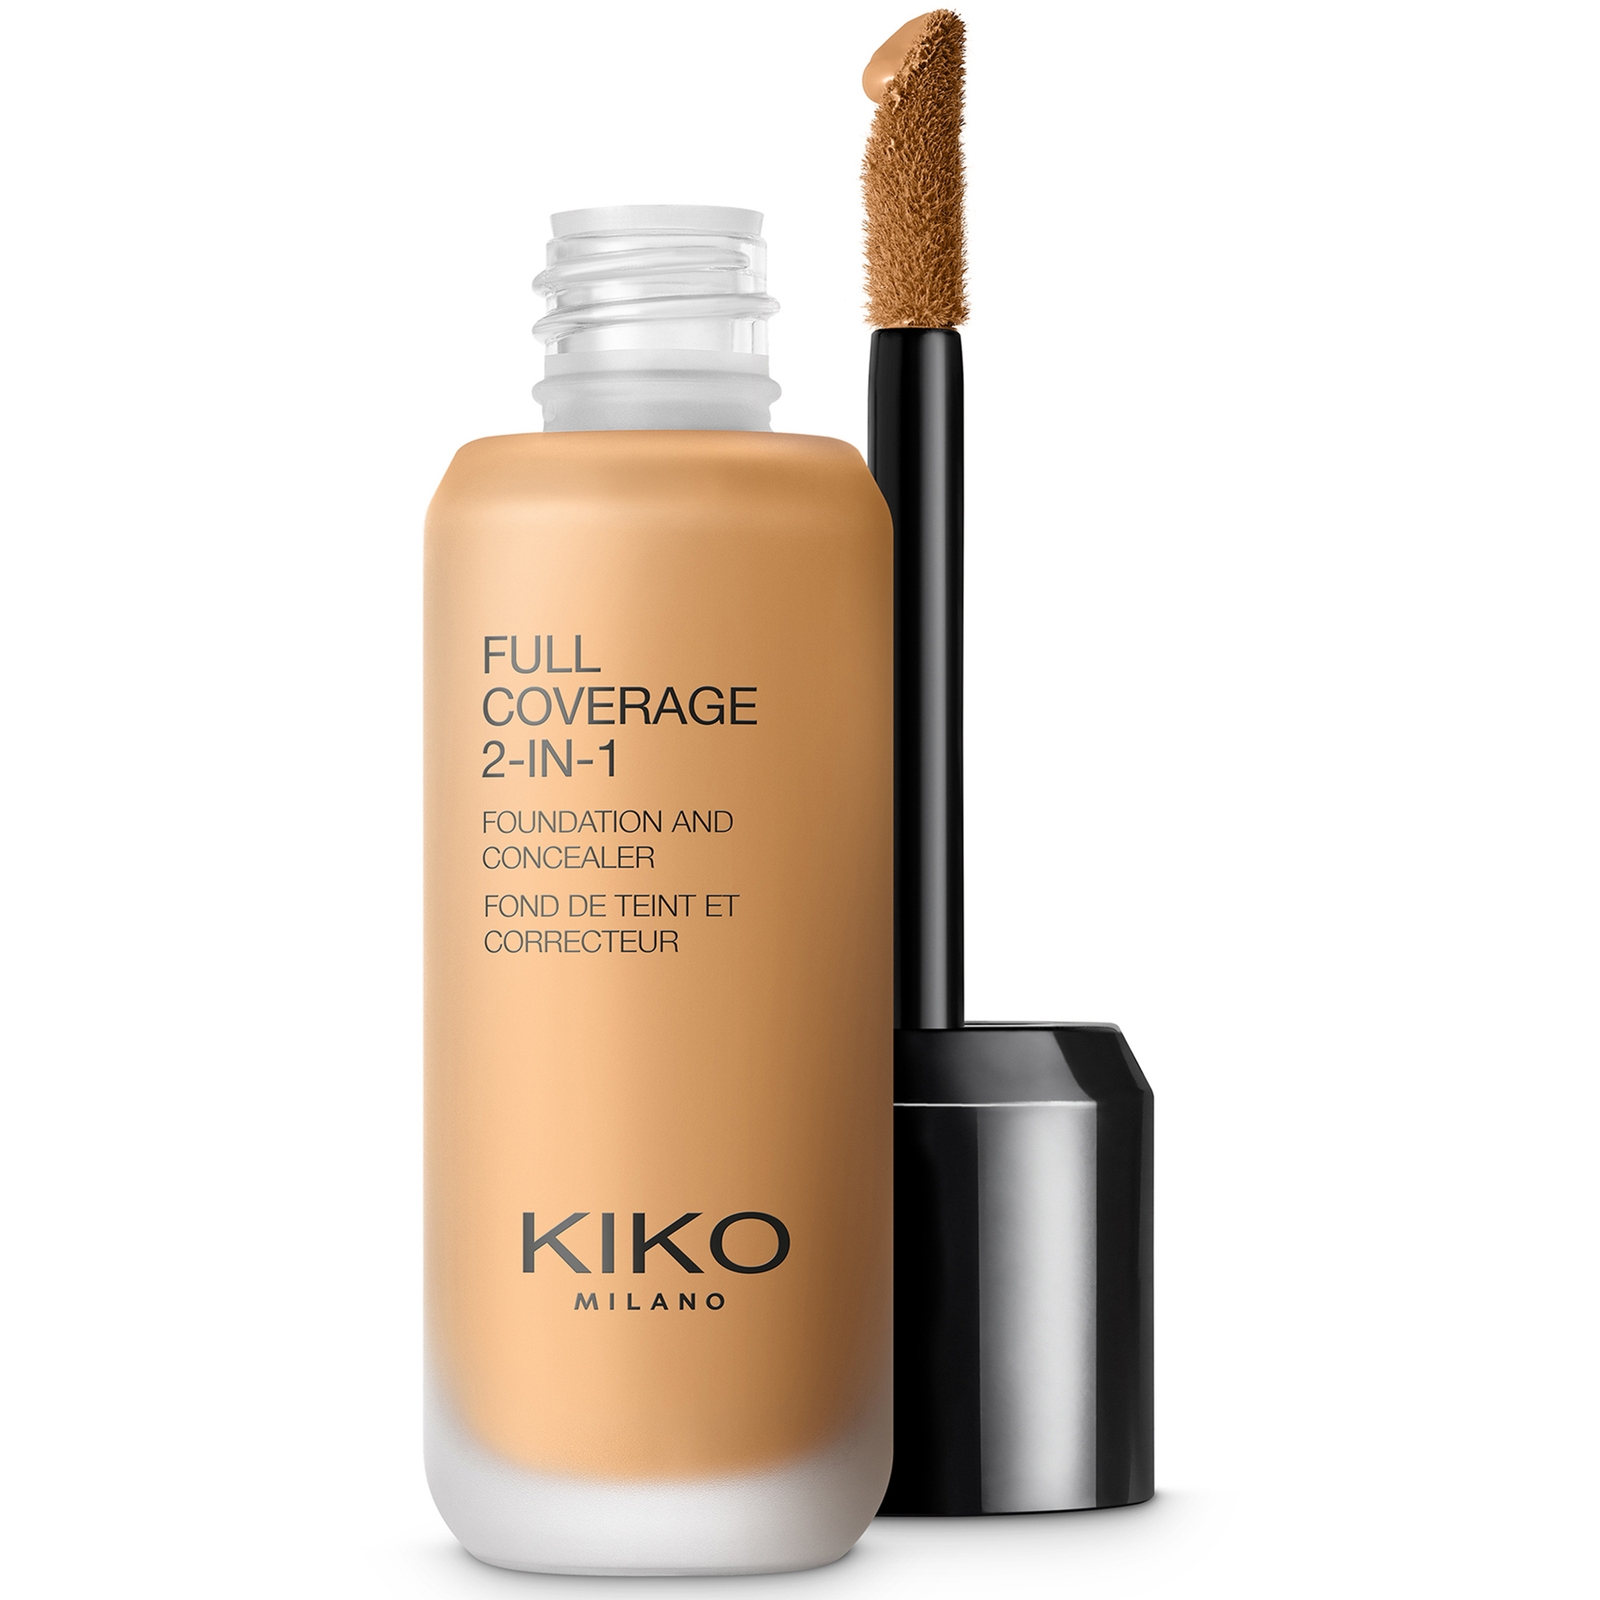 KIKO Milano Full Coverage 2-in-1 Foundation and Concealer 25ml (Various Shades) - 65 Gold